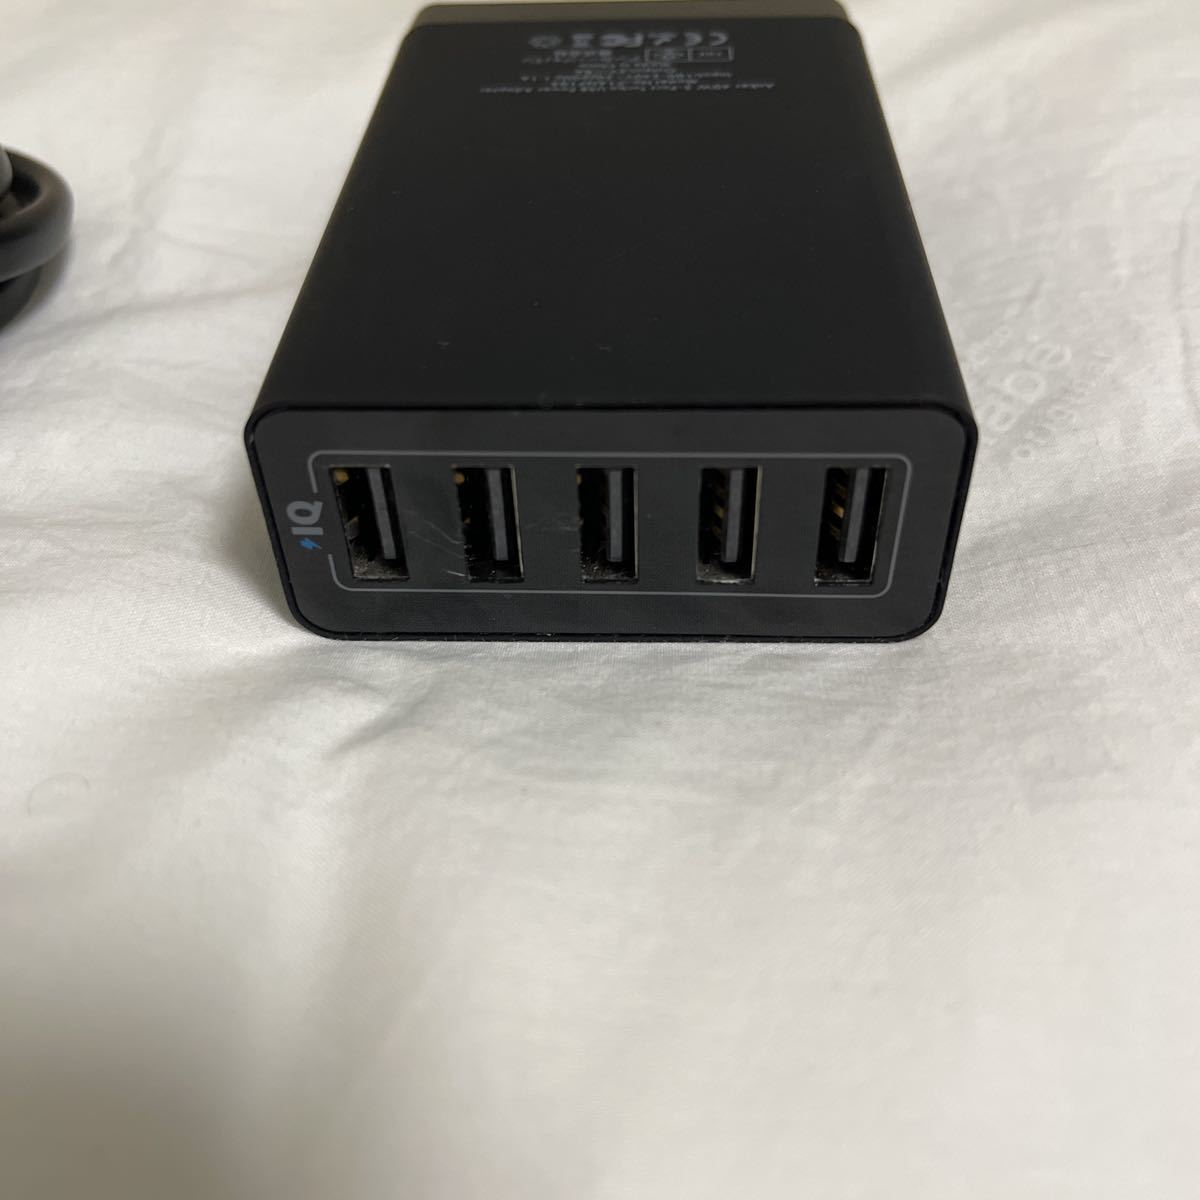 Anker 40W 5-Port Turbo USB Power Adapter 71AN7105 ブラック product details |  Proxy bidding and ordering service for auctions and shopping within Japan  and the United States - Get the latest news